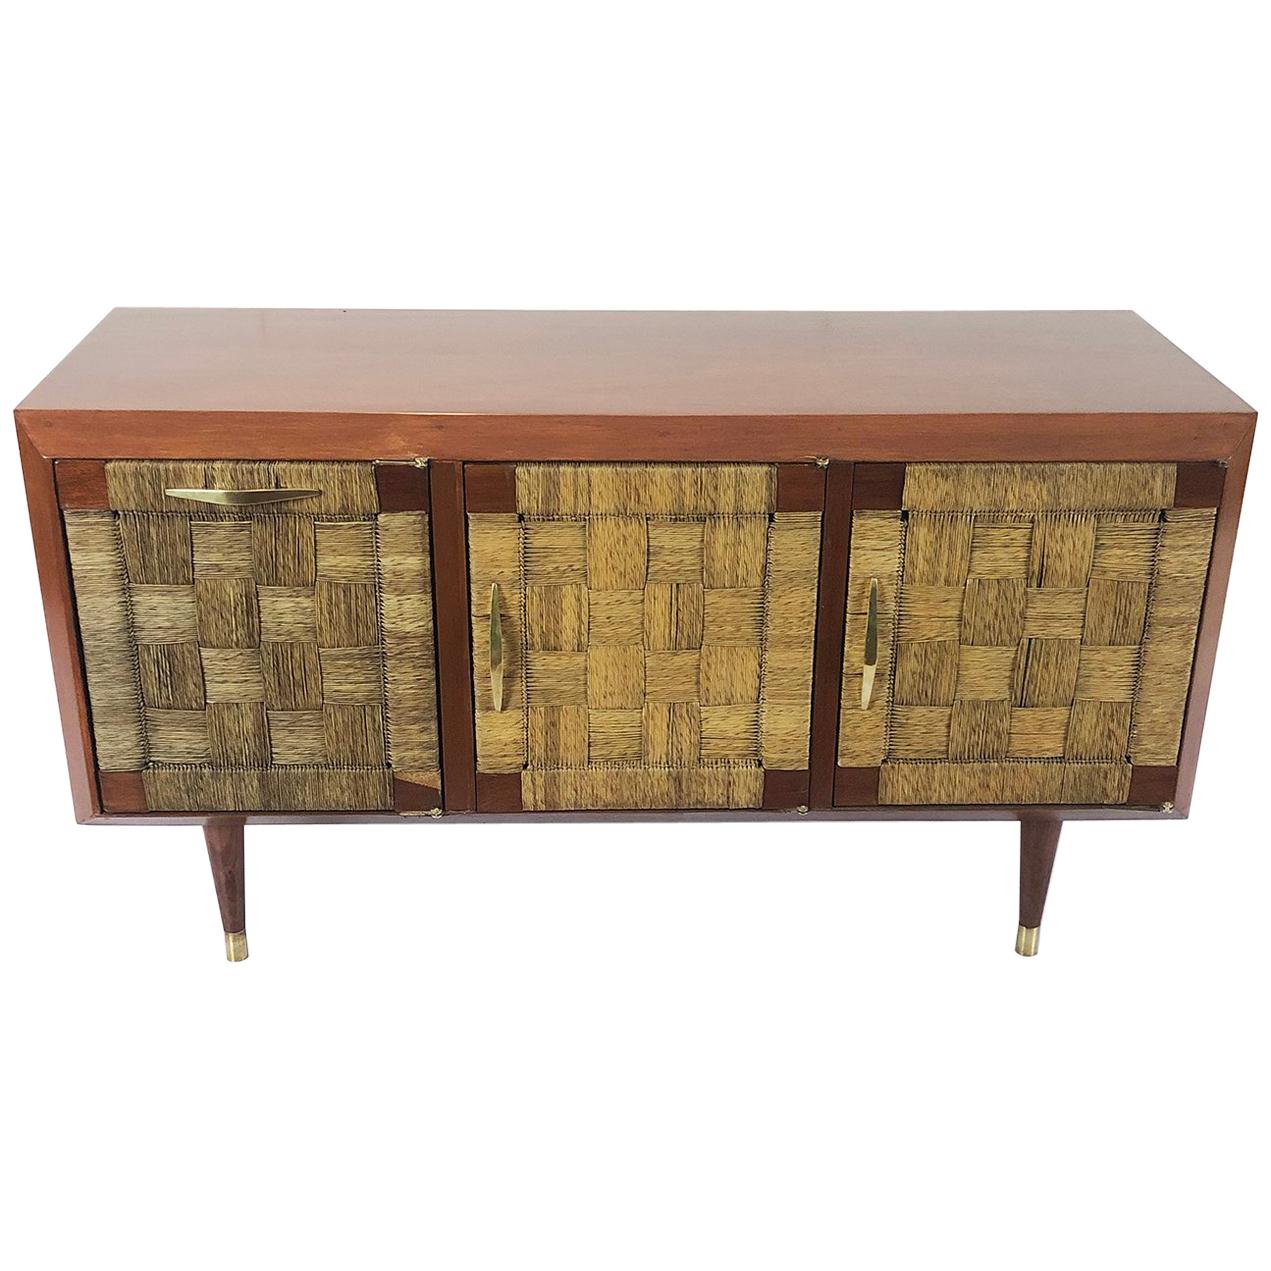 Petite Credenza in Mahogany and Woven Sea Grass Attributed to Edmond Spence For Sale